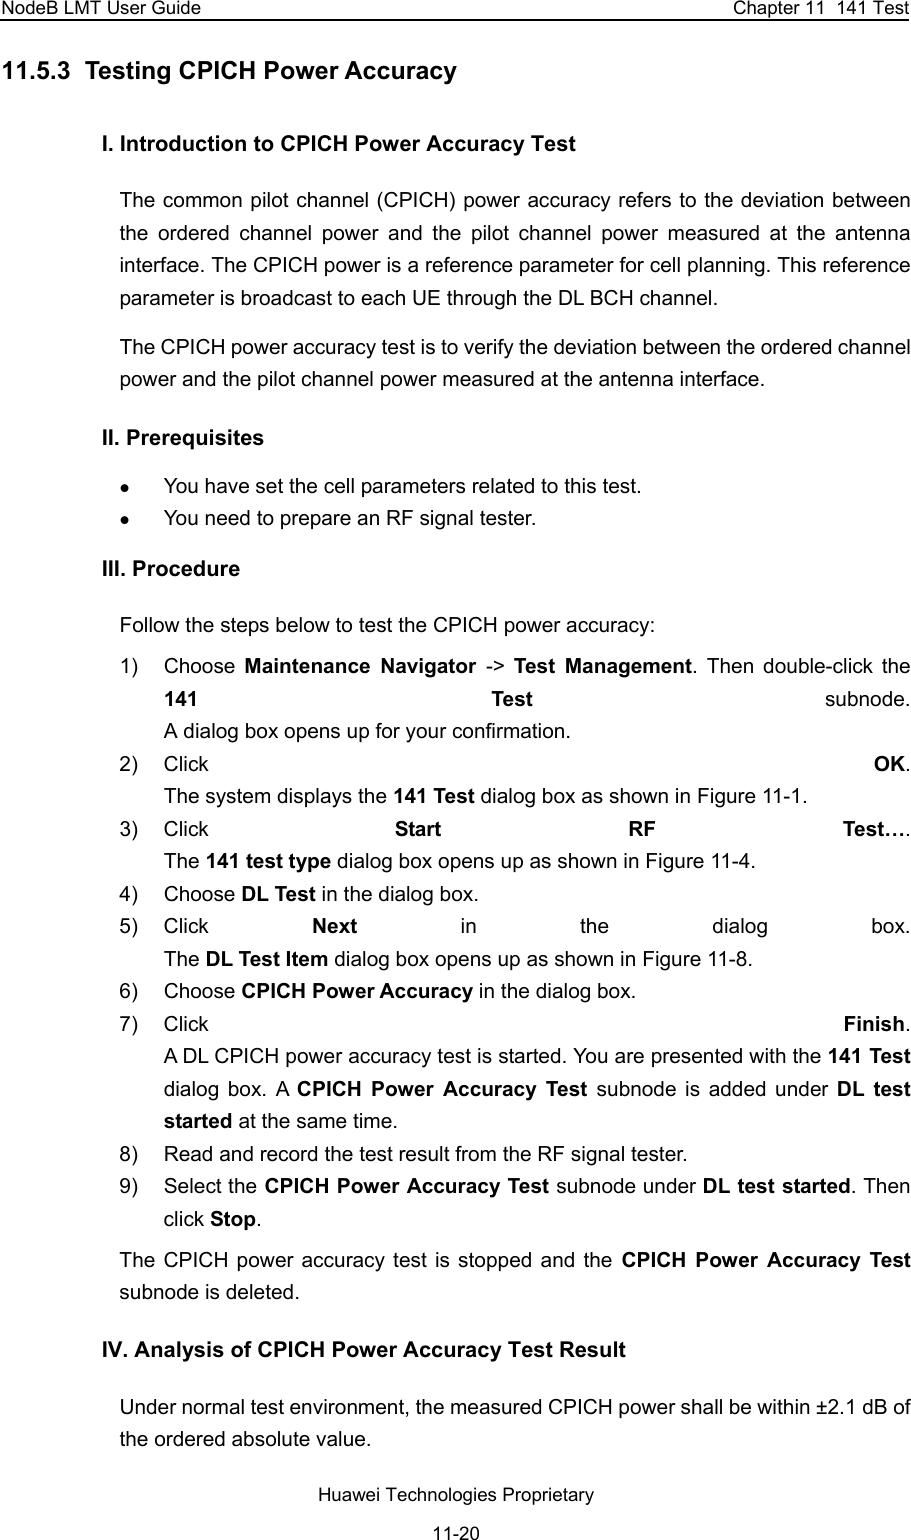 NodeB LMT User Guide  Chapter 11  141 Test 11.5.3  Testing CPICH Power Accuracy  I. Introduction to CPICH Power Accuracy Test The common pilot channel (CPICH) power accuracy refers to the deviation between the ordered channel power and the pilot channel power measured at the antenna interface. The CPICH power is a reference parameter for cell planning. This reference parameter is broadcast to each UE through the DL BCH channel. The CPICH power accuracy test is to verify the deviation between the ordered channel power and the pilot channel power measured at the antenna interface.  II. Prerequisites  z You have set the cell parameters related to this test.  z You need to prepare an RF signal tester.  III. Procedure Follow the steps below to test the CPICH power accuracy:  1) Choose Maintenance Navigator -&gt;  Test Management. Then double-click the 141 Test subnode.  A dialog box opens up for your confirmation. 2) Click  OK.  The system displays the 141 Test dialog box as shown in Figure 11-1. 3) Click  Start RF Test….  The 141 test type dialog box opens up as shown in Figure 11-4. 4) Choose DL Test in the dialog box.  5) Click  Next in the dialog box.  The DL Test Item dialog box opens up as shown in Figure 11-8. 6) Choose CPICH Power Accuracy in the dialog box.  7) Click  Finish.  A DL CPICH power accuracy test is started. You are presented with the 141 Test dialog box. A CPICH Power Accuracy Test subnode is added under DL test started at the same time. 8)  Read and record the test result from the RF signal tester.  9) Select the CPICH Power Accuracy Test subnode under DL test started. Then click Stop.  The CPICH power accuracy test is stopped and the CPICH Power Accuracy Test subnode is deleted. IV. Analysis of CPICH Power Accuracy Test Result Under normal test environment, the measured CPICH power shall be within ±2.1 dB of the ordered absolute value.  Huawei Technologies Proprietary 11-20 